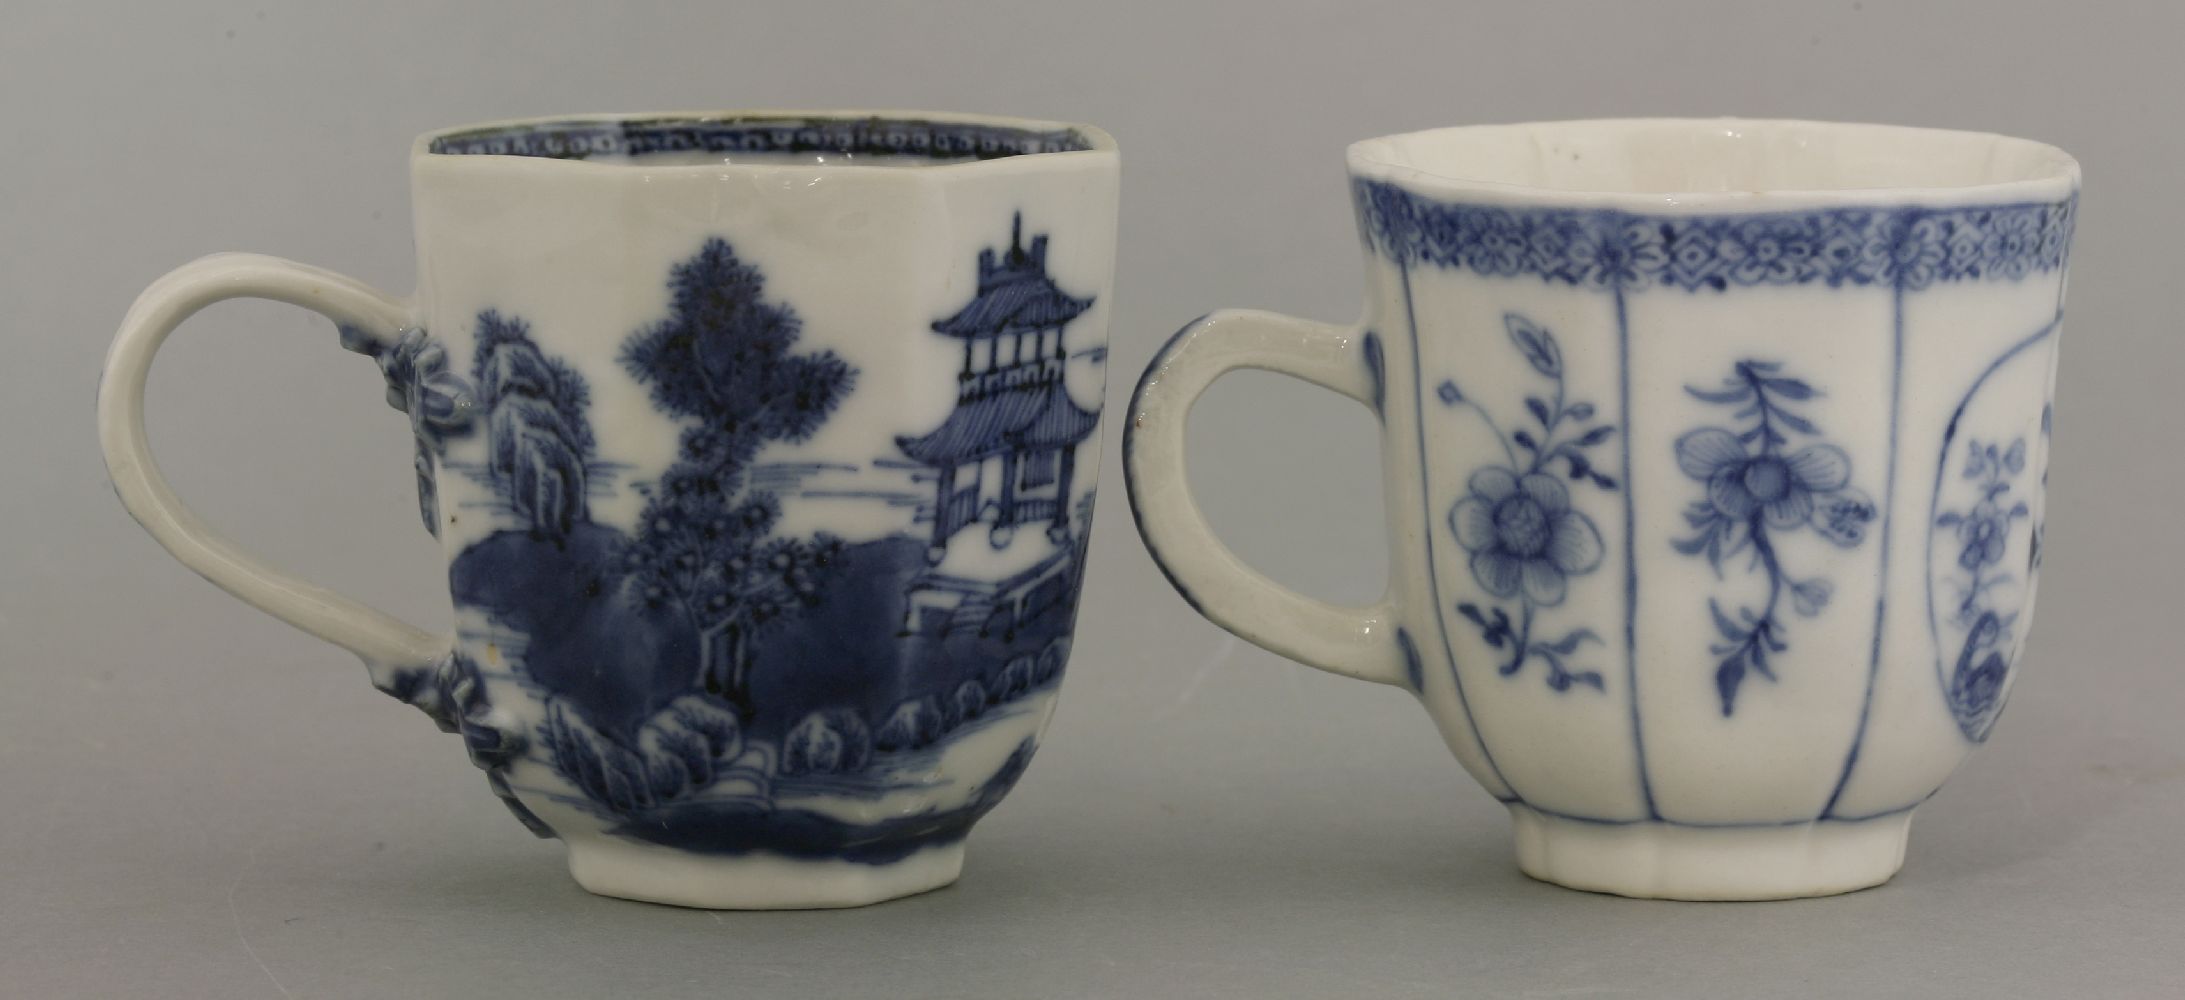 Two rare Coffee Cups,c.1740, one soft paste, lobed and delicately picked out in underglaze blue with - Image 2 of 3